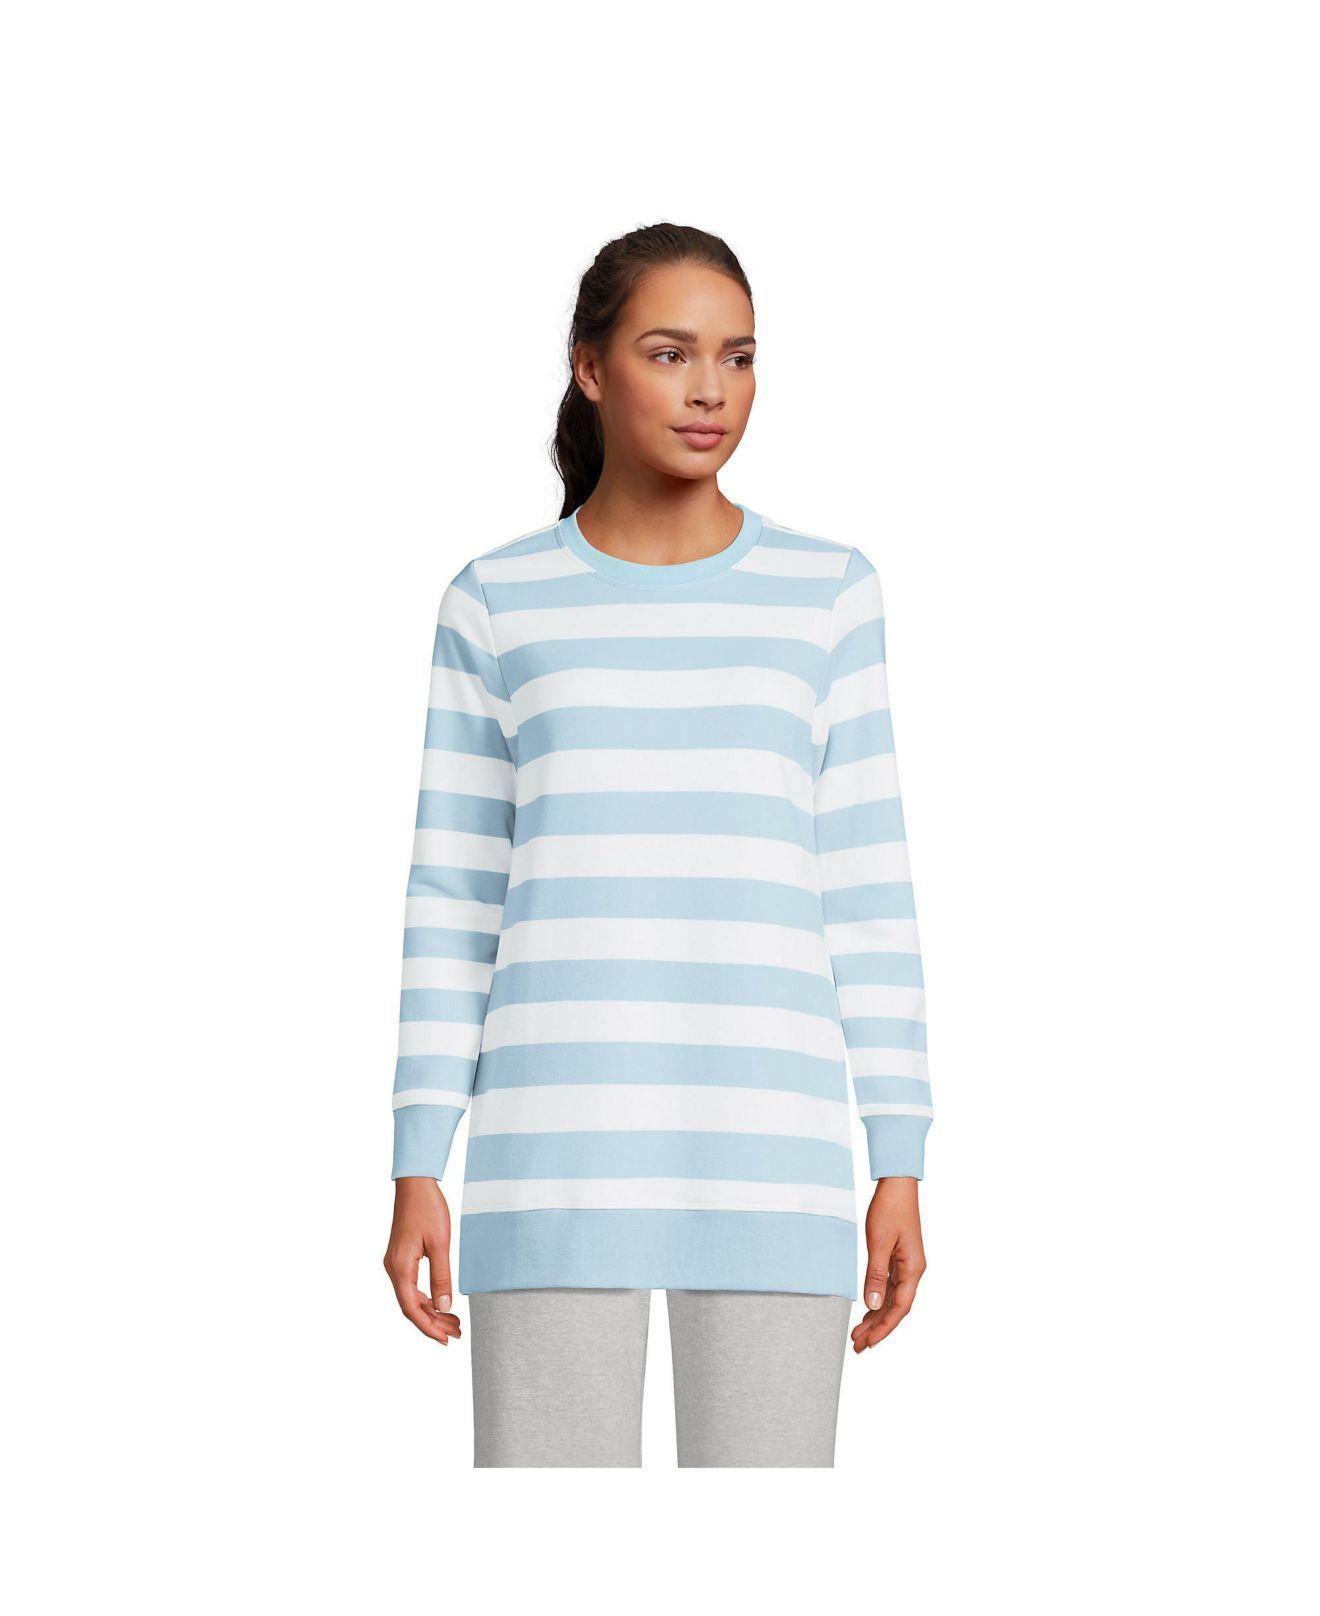 Lands' End Women's Serious Sweats Long Sleeve Collared Pullover